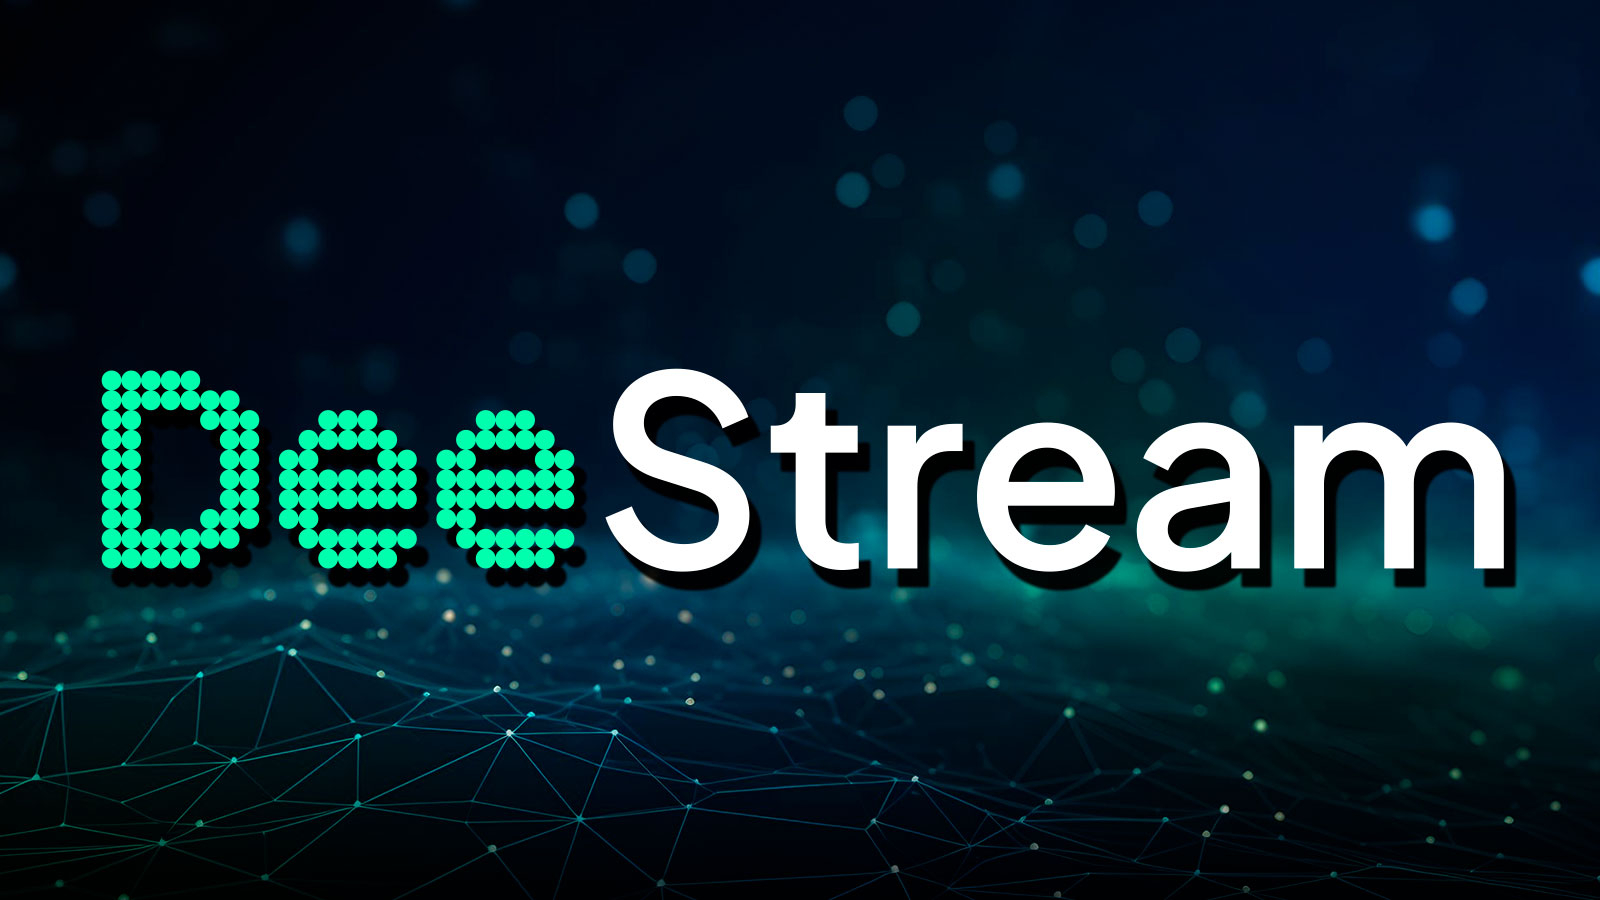 DeeStream (DST) Aims For Shift into Decentralized Streaming, Bitcoin (BTC) & Ethereum (ETH) Holders Await Recovery